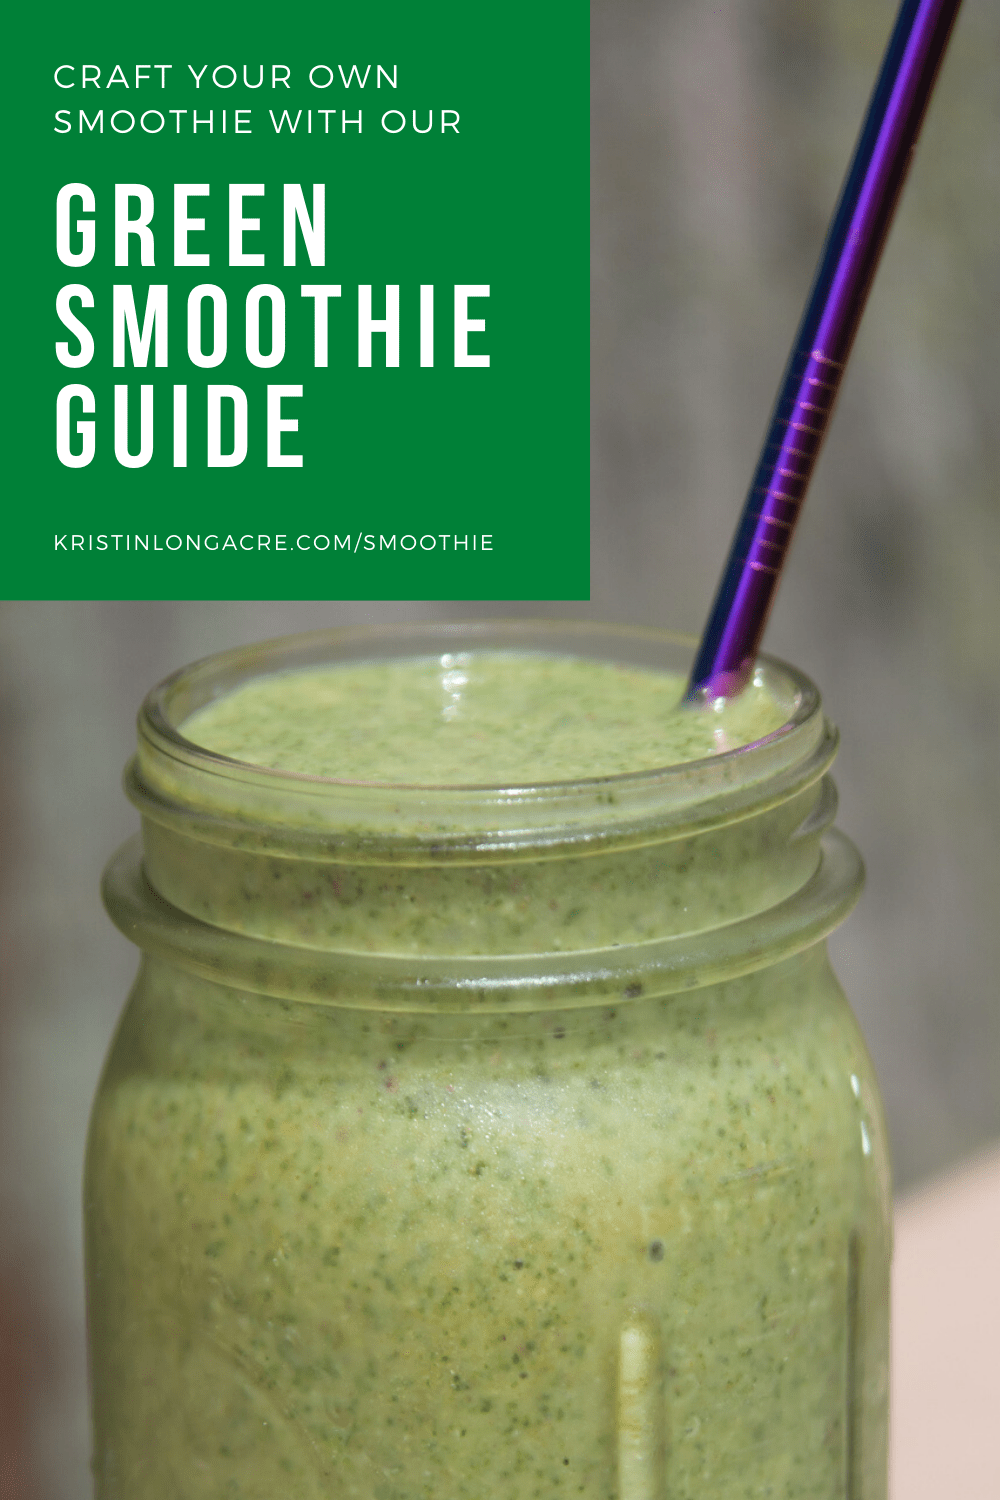 How to Make A Green Smoothie